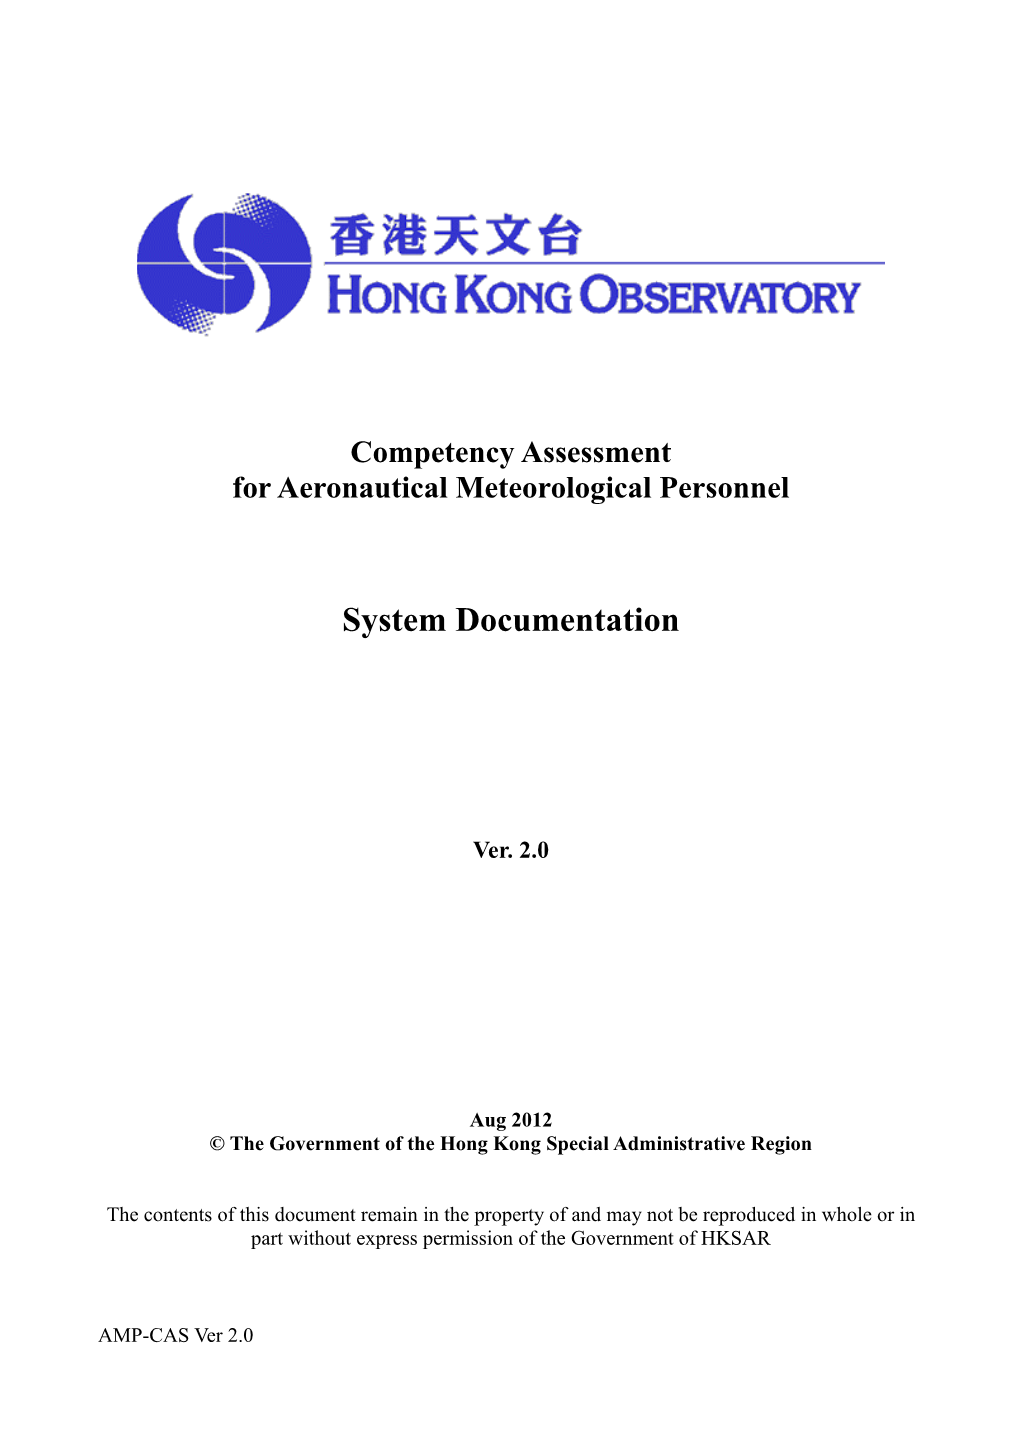 Competency Assessment System